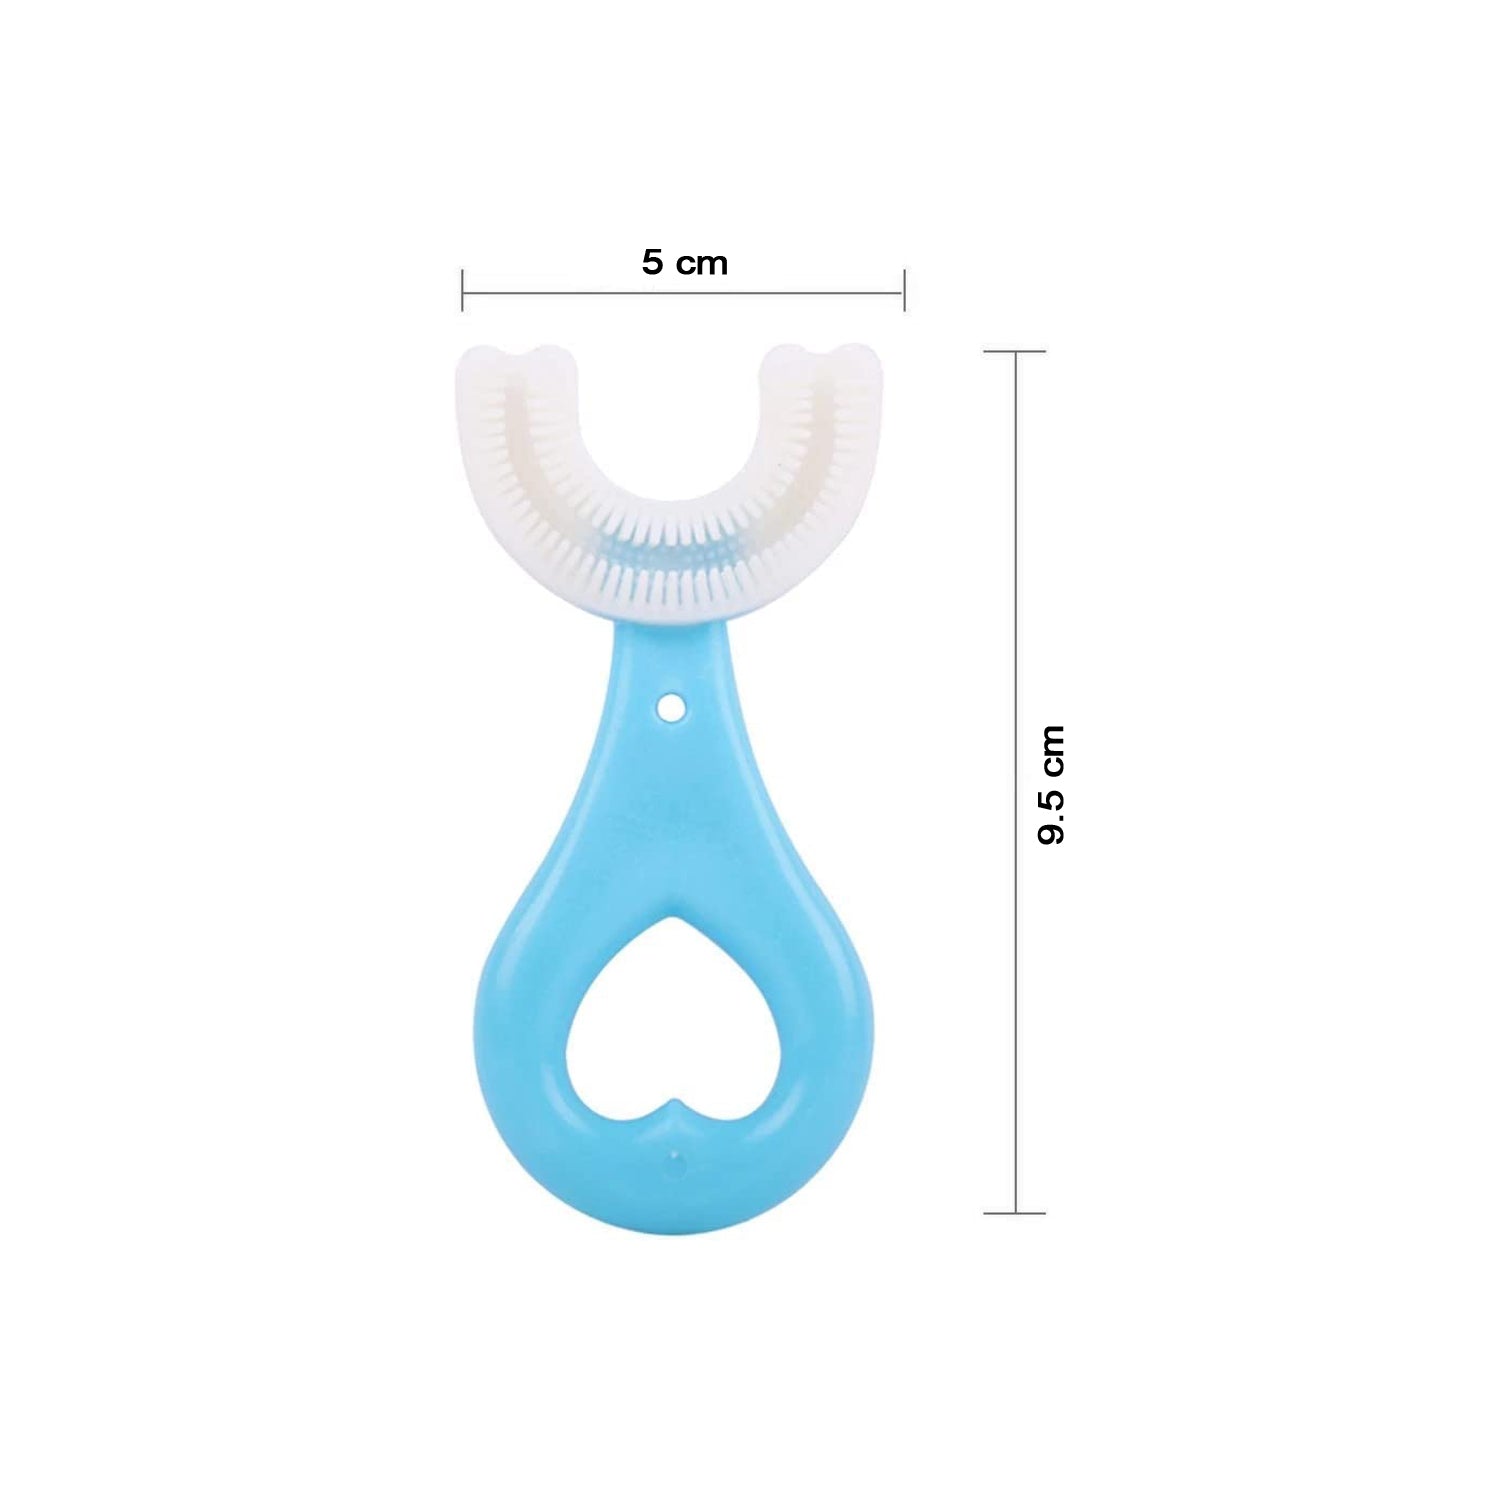 4774 Kids U S Tooth Brush used in all kinds of household bathroom places for washing teeth of kids, toddlers and children’s easily and comfortably. - China, 0.055 kgs